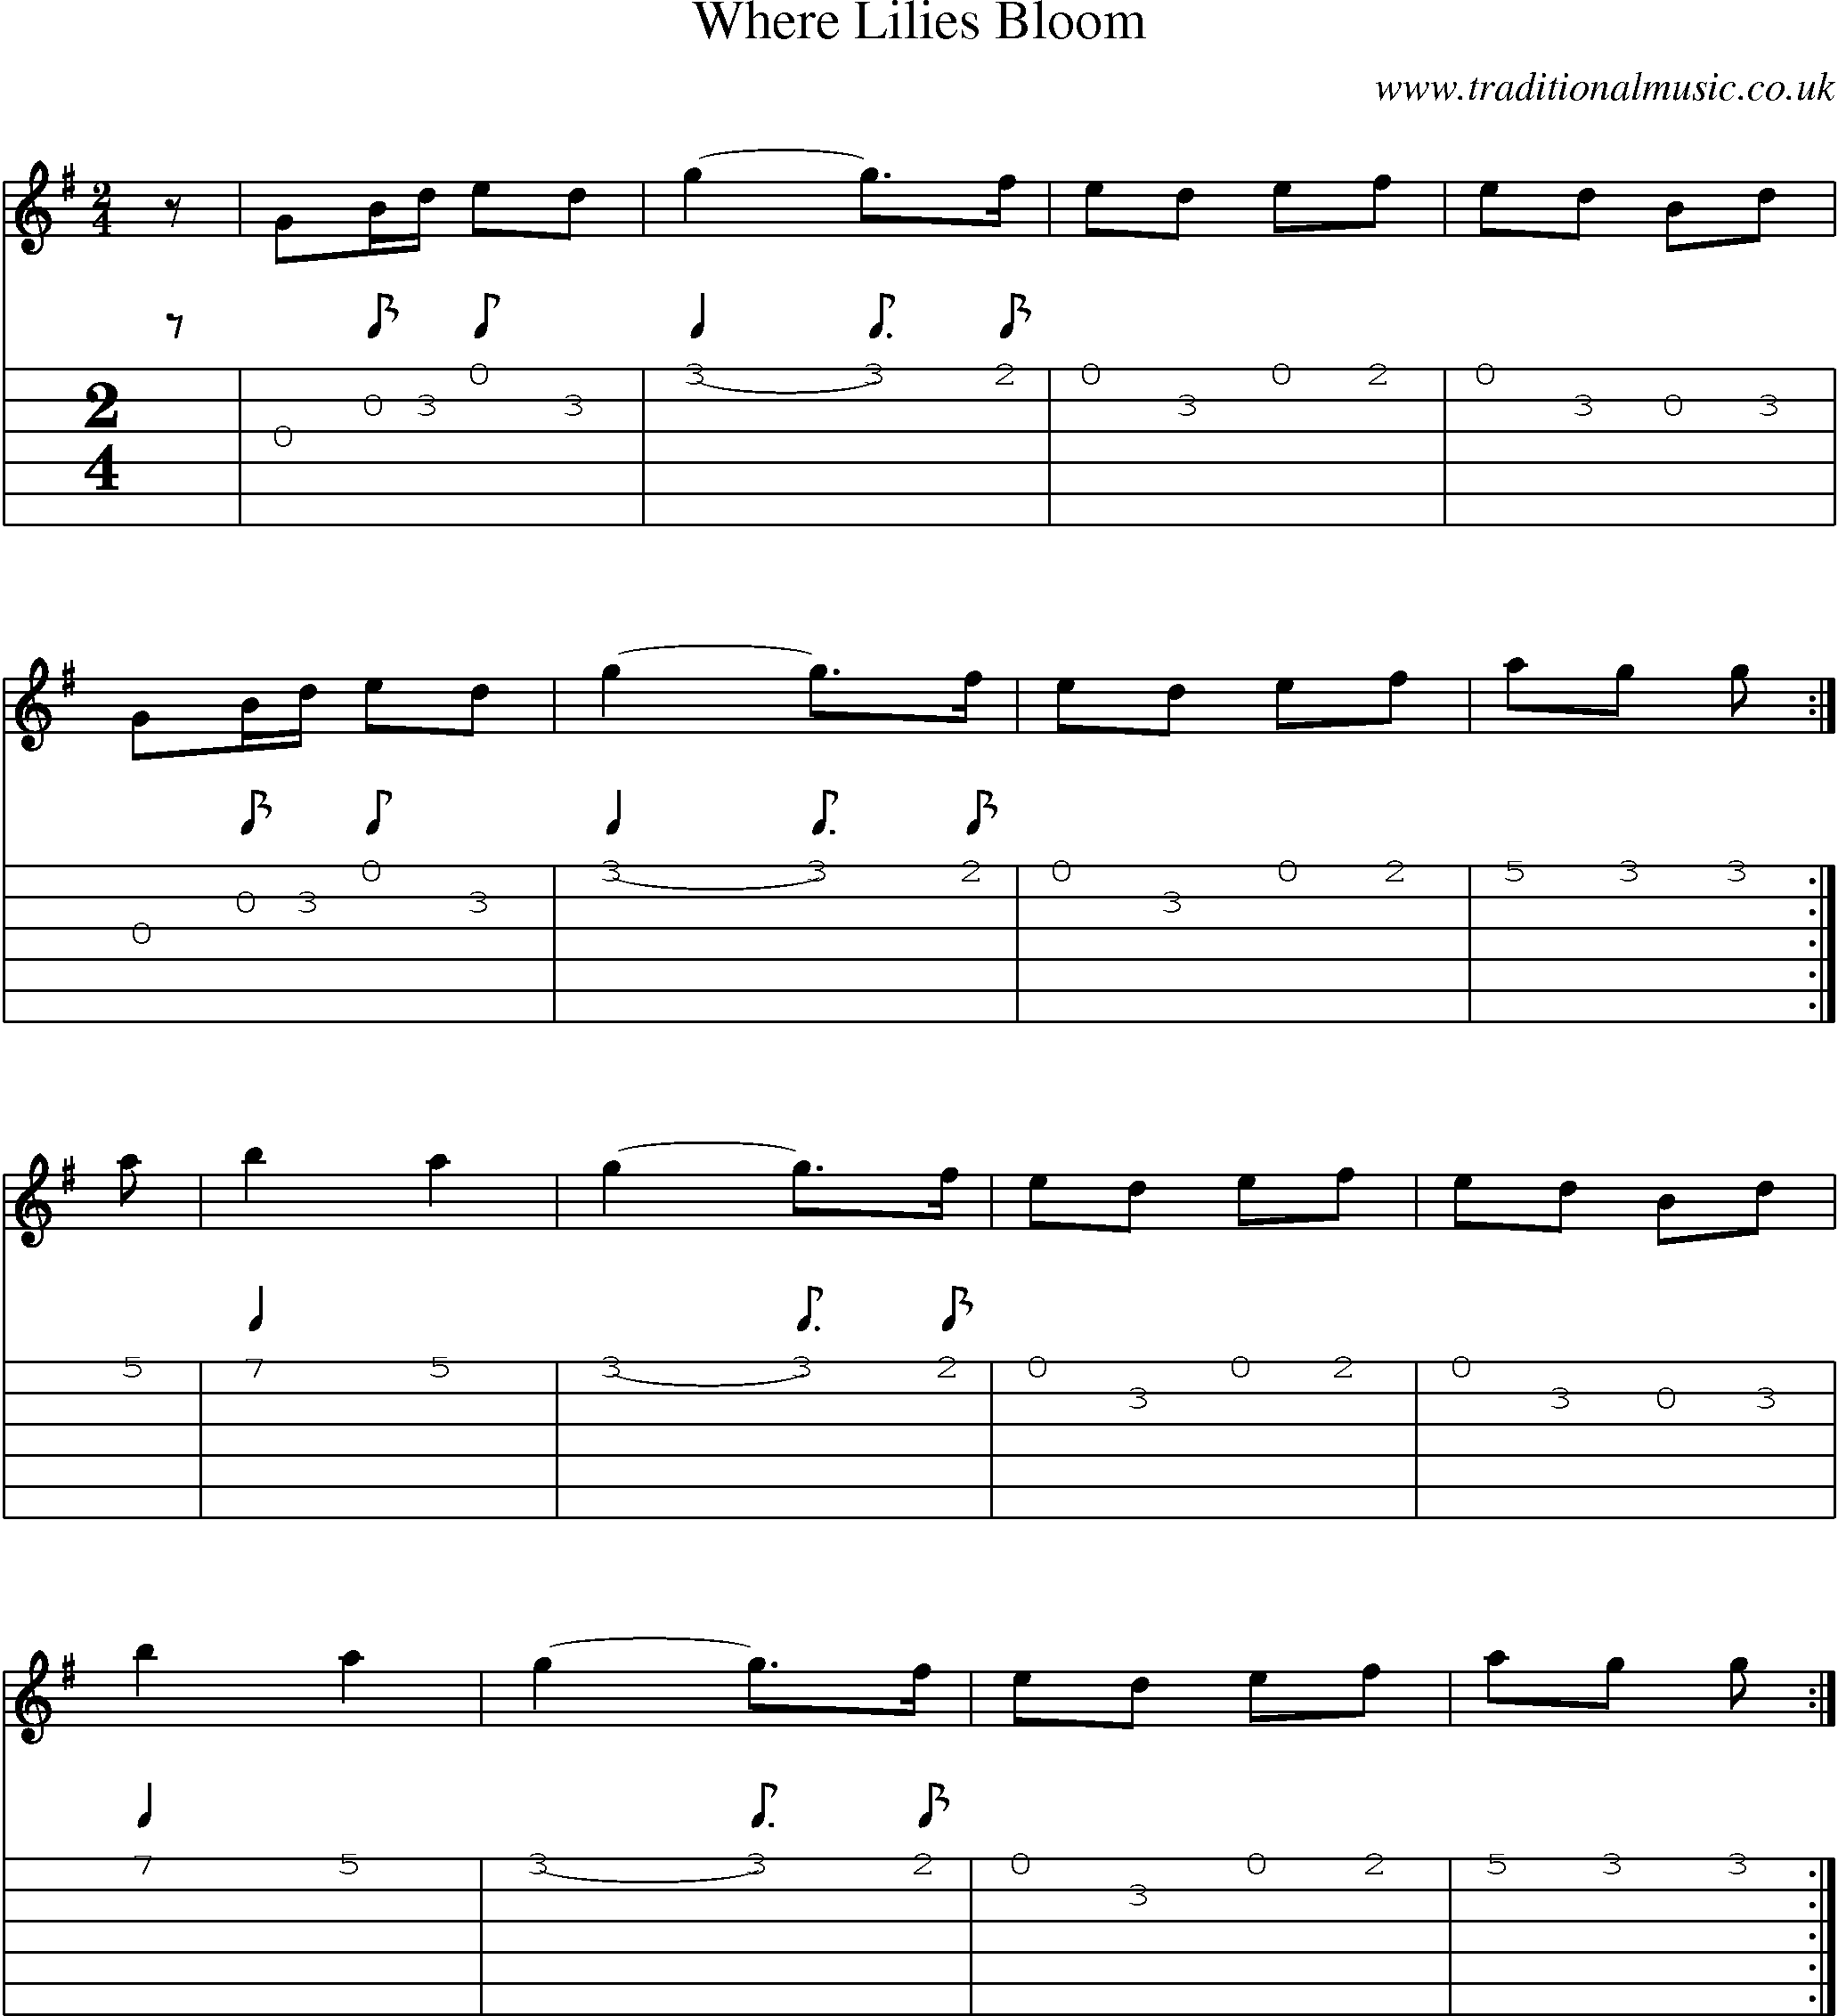 Music Score and Guitar Tabs for Where Lilies Bloom